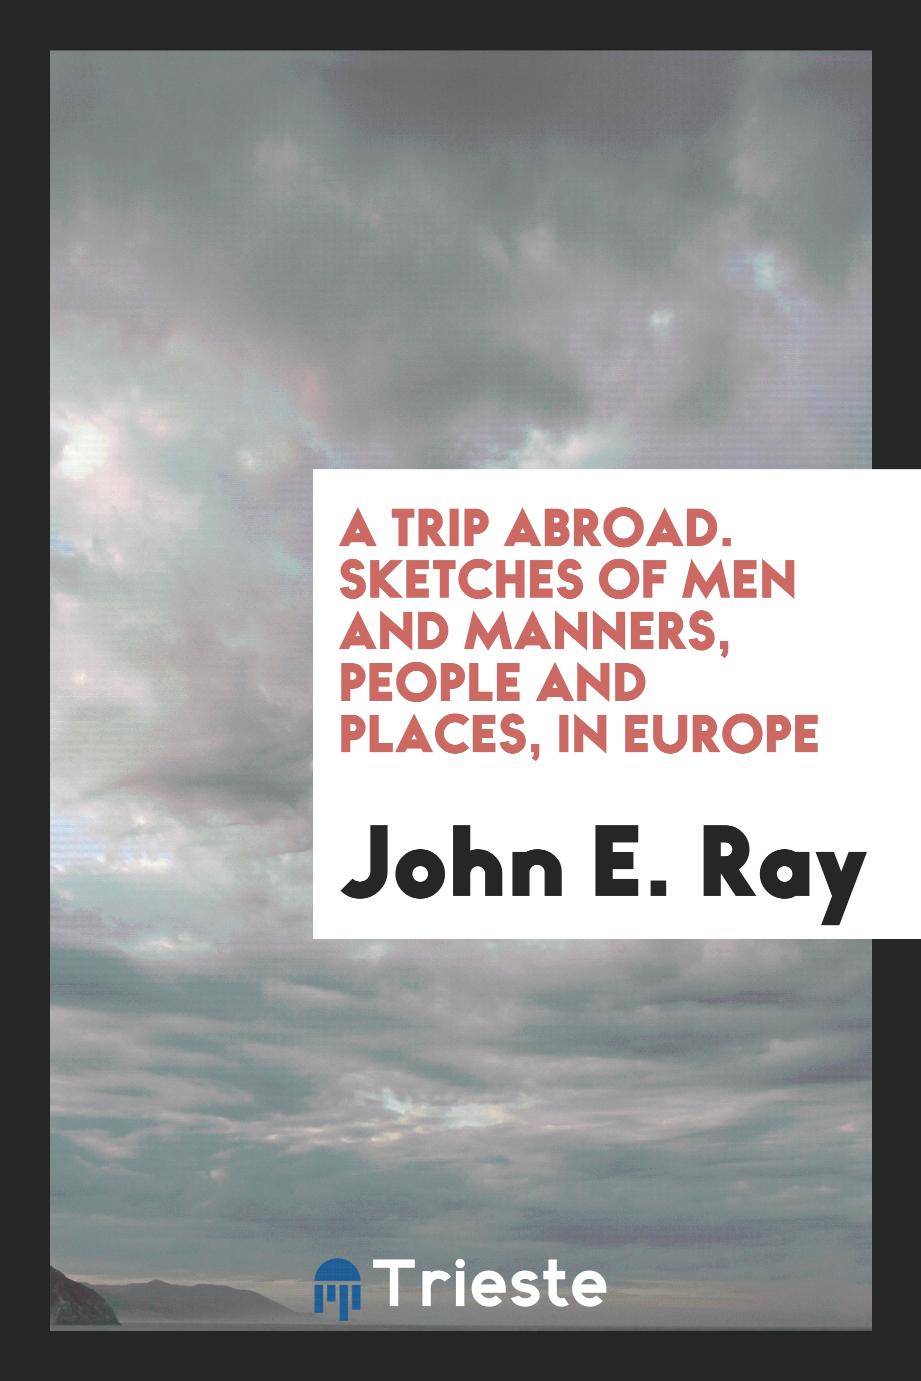 A Trip Abroad. Sketches of Men and Manners, People and Places, in Europe